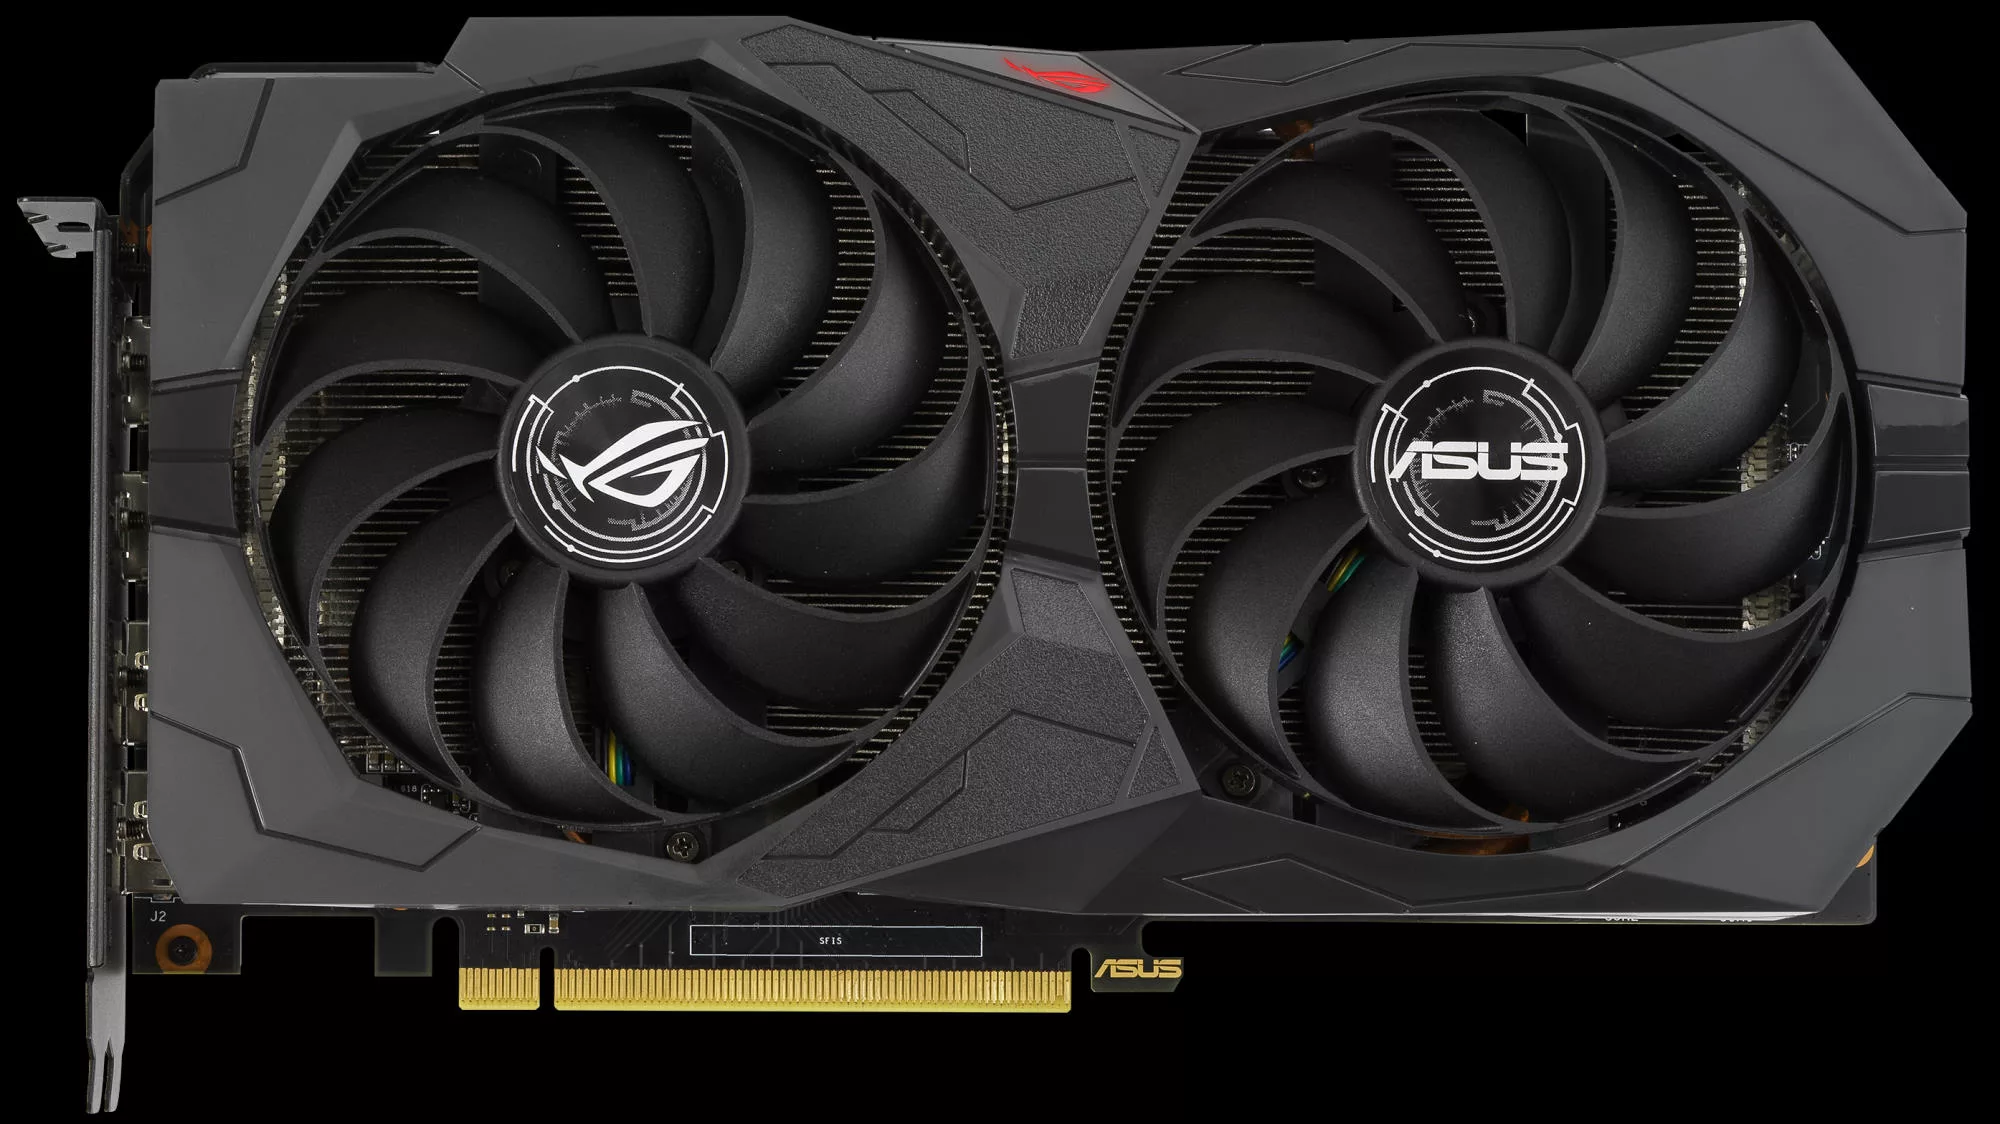 GeForce GTX 1660 SUPER and GTX 1650 SUPER graphics cards from ROG 